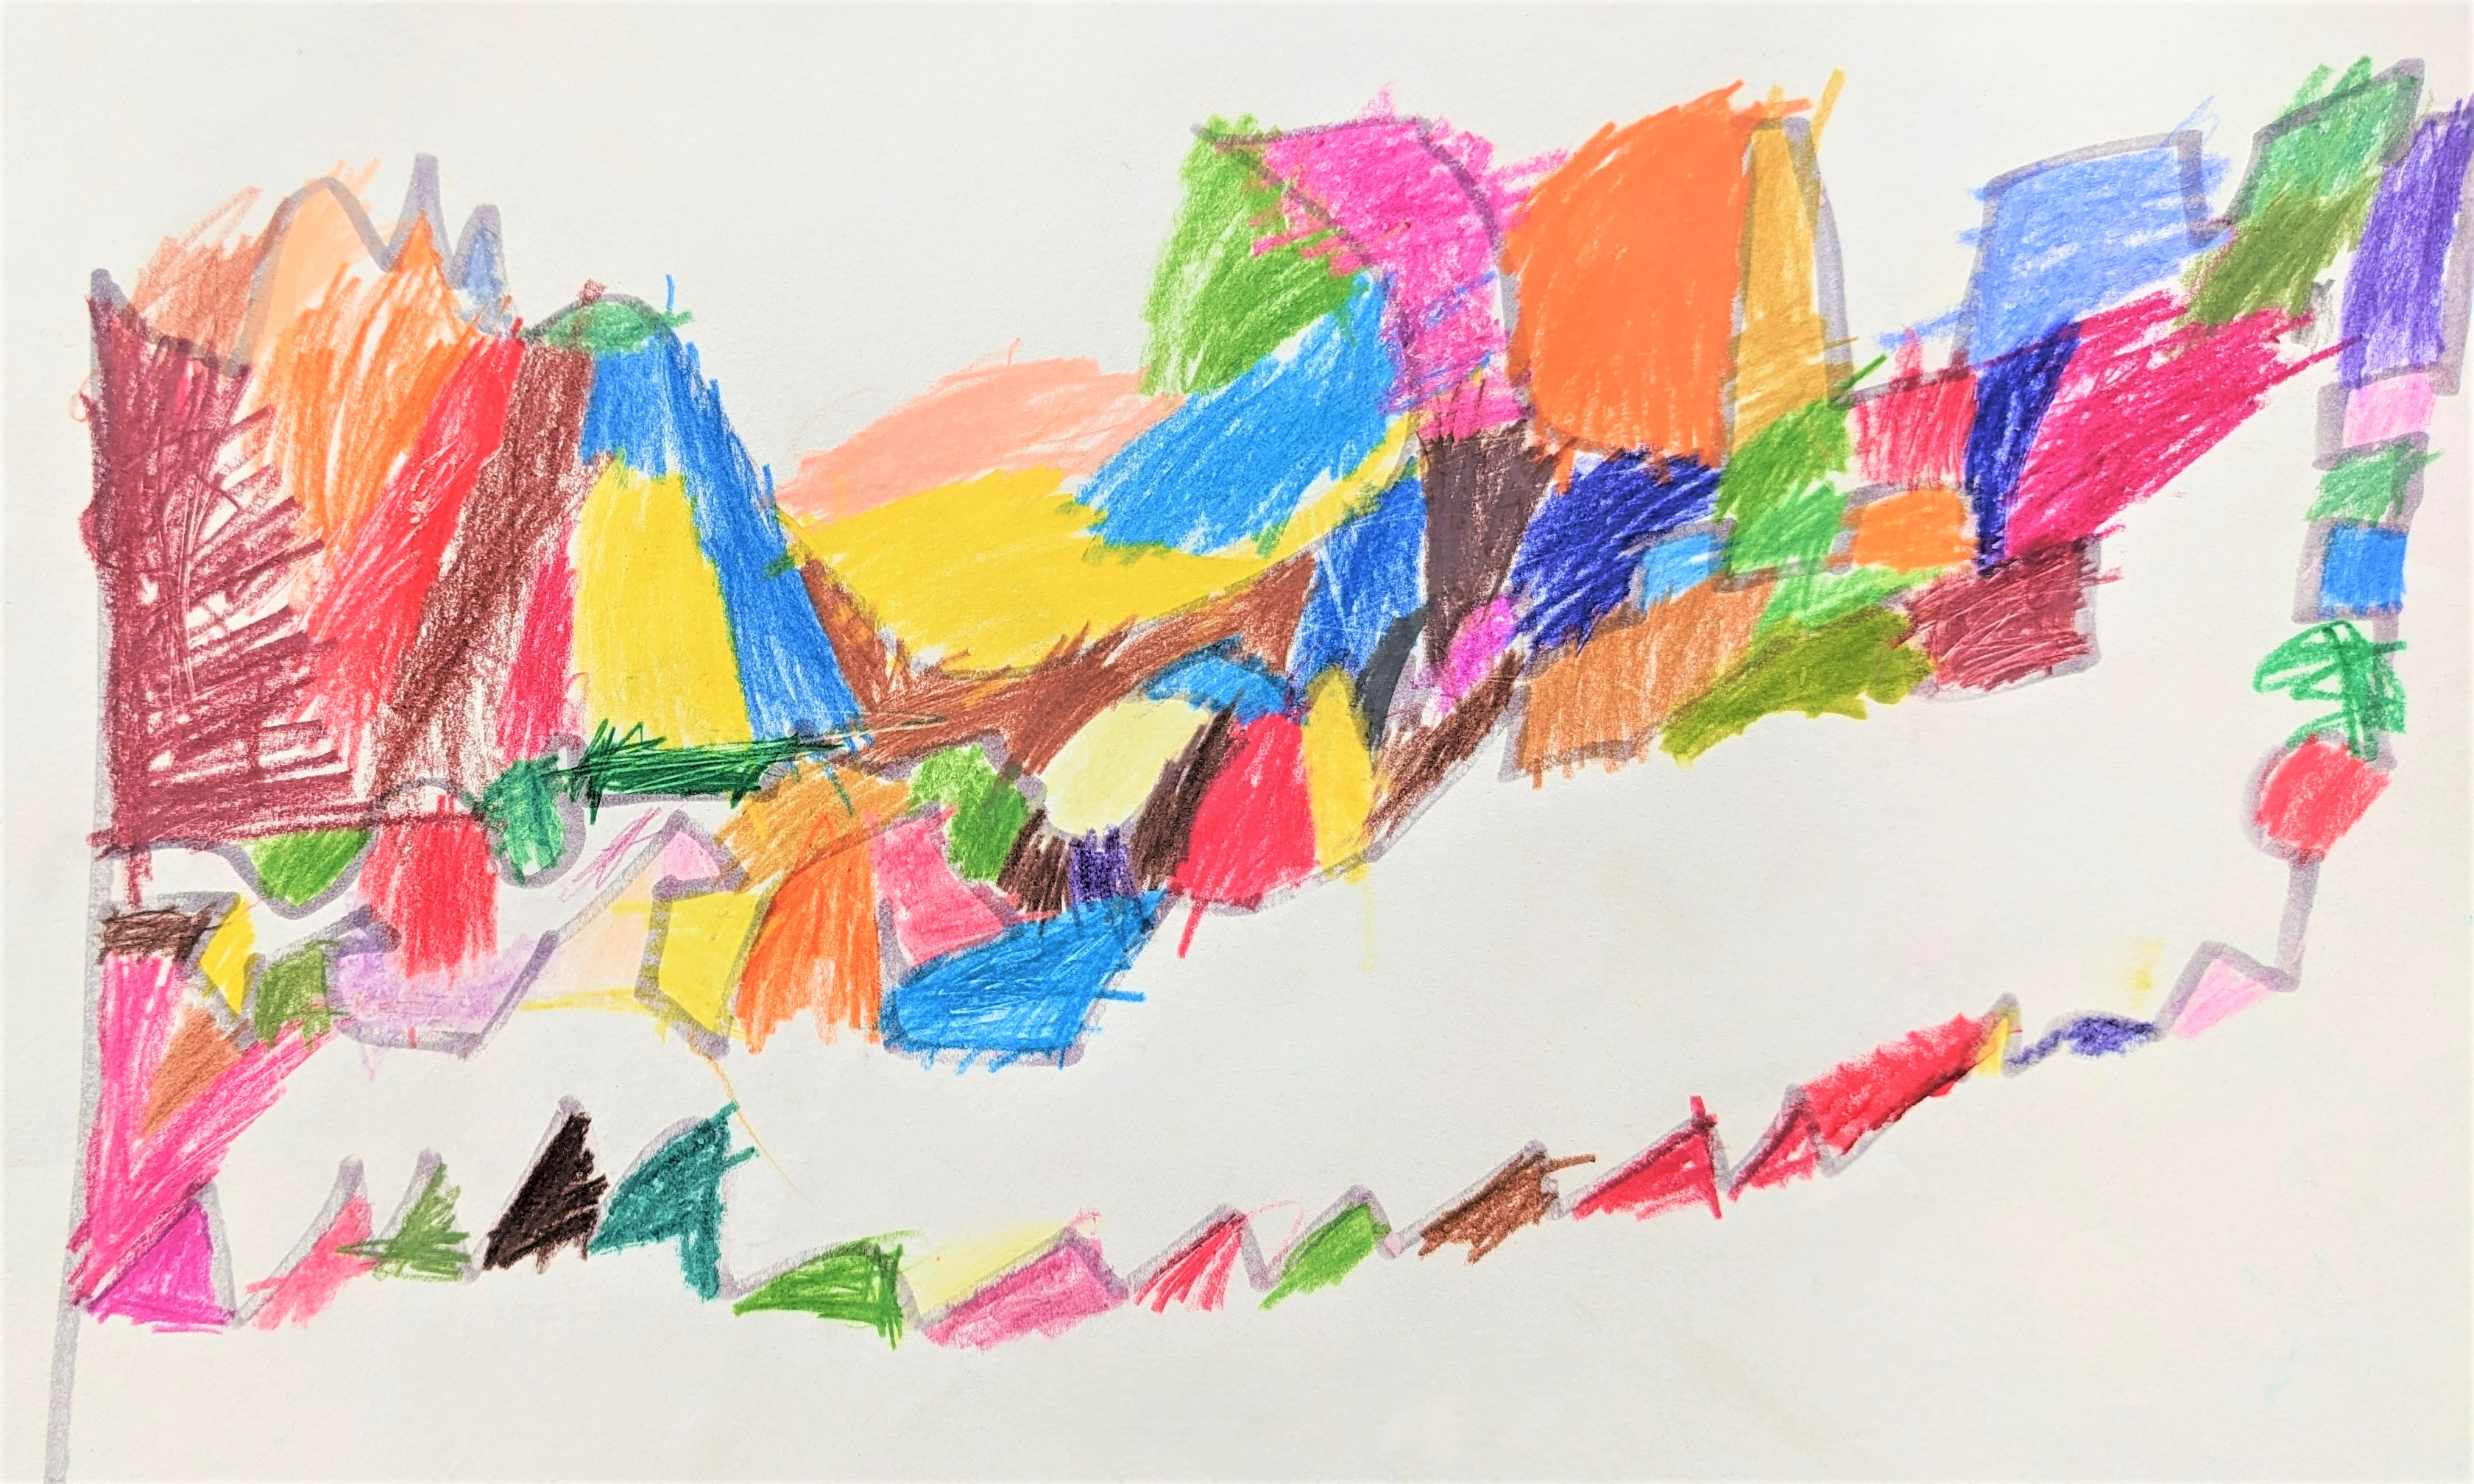 Child's artwork in crayon with brightly colored abstract shapes